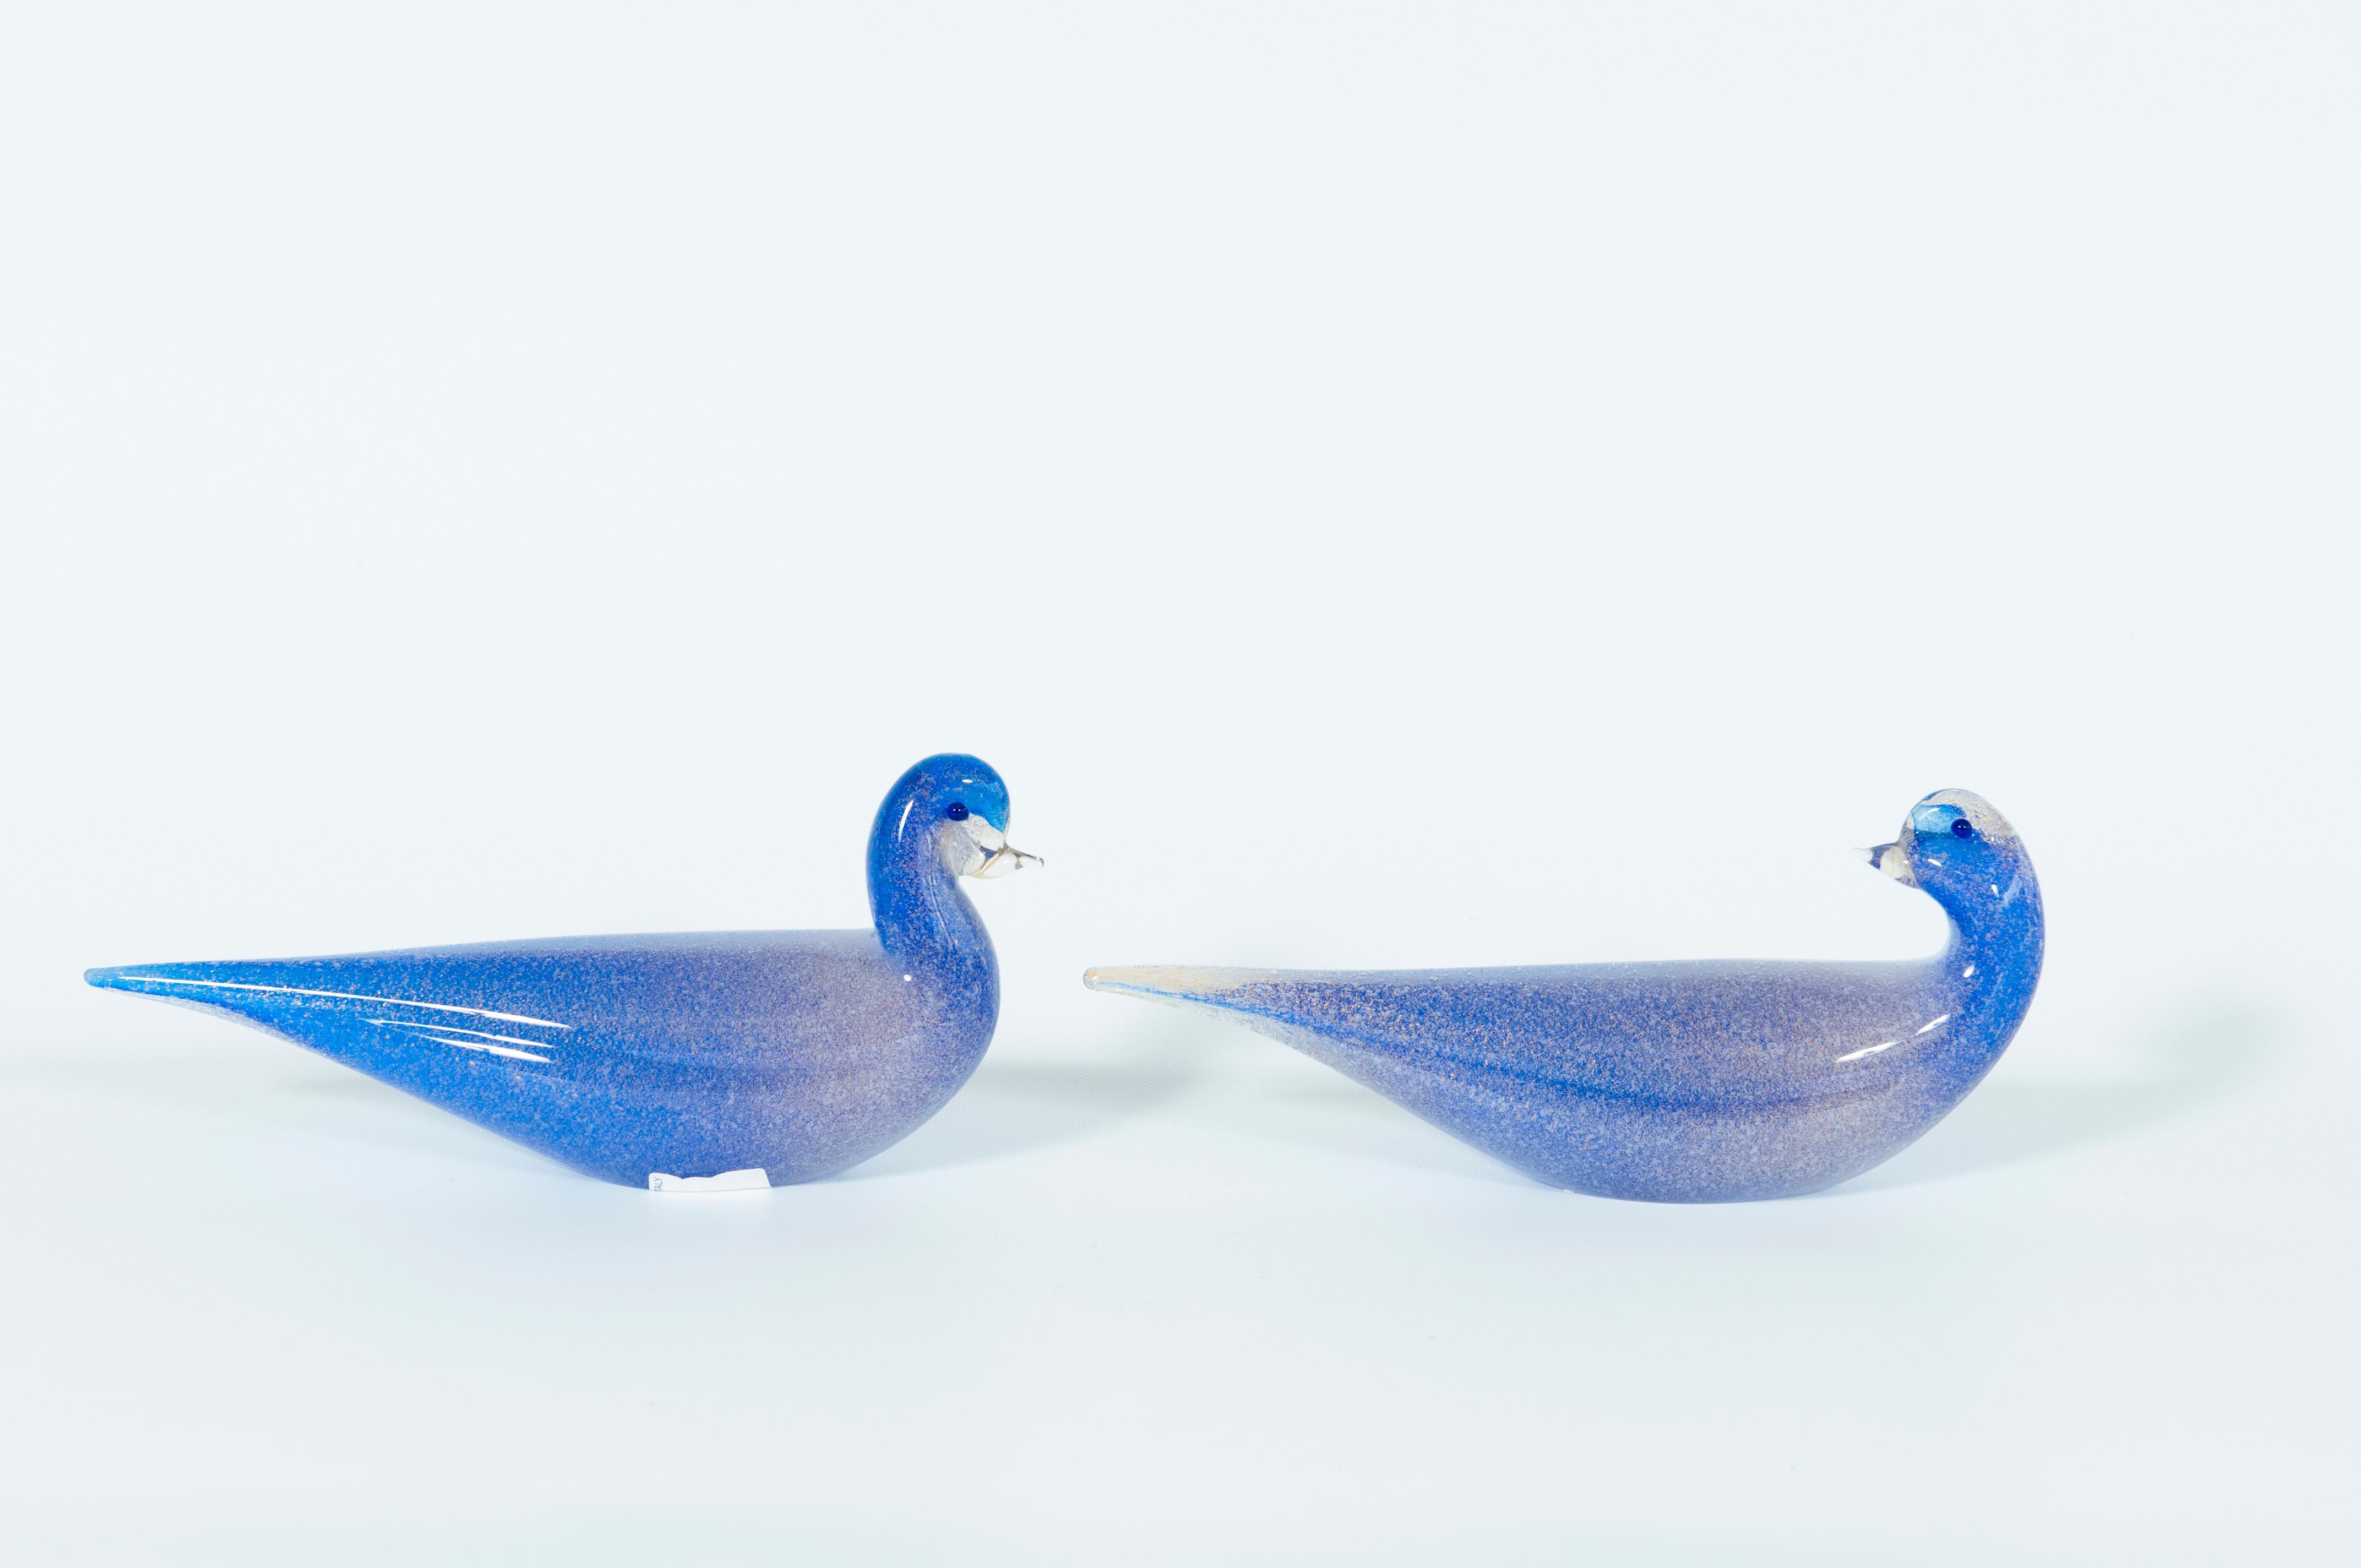 Pair of Blue Murano glass duck sculptures signed Cenedese 1980s Italy with Submerged Gold Finishes
This artistic pair of duck sculptures will brings with itself a touch of Venerian beauty and tradition. These pieces of art stand out for their